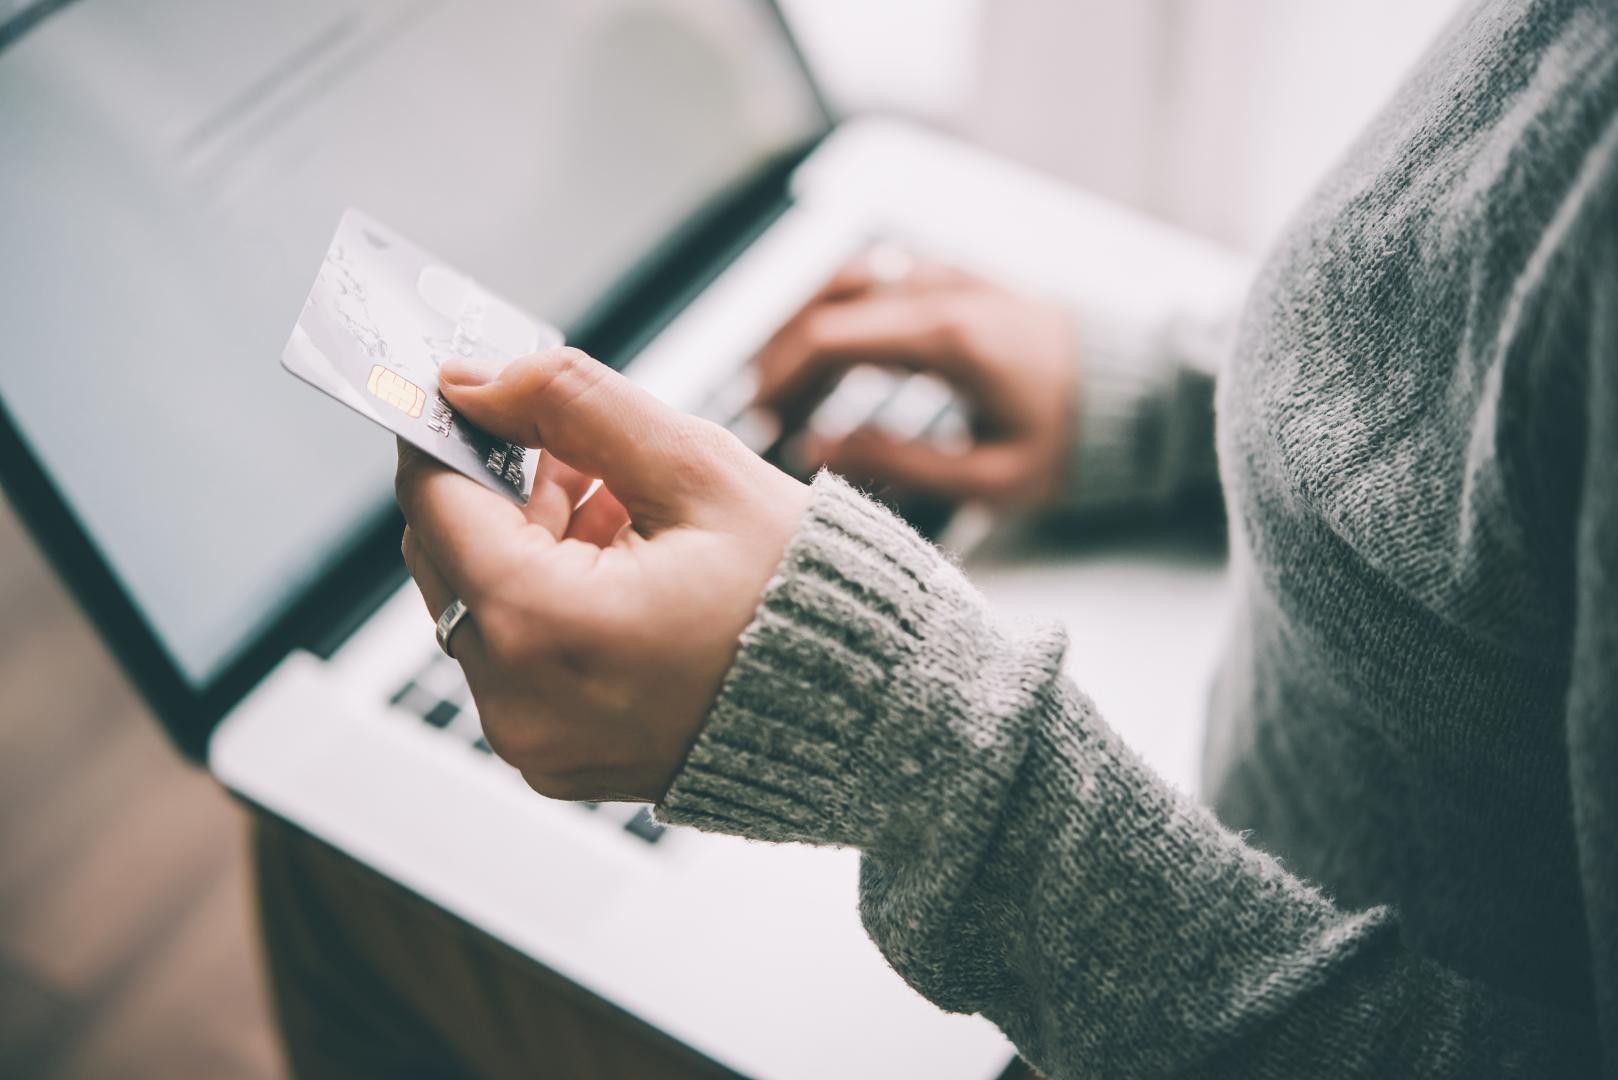 Person using credit card to purchase online.